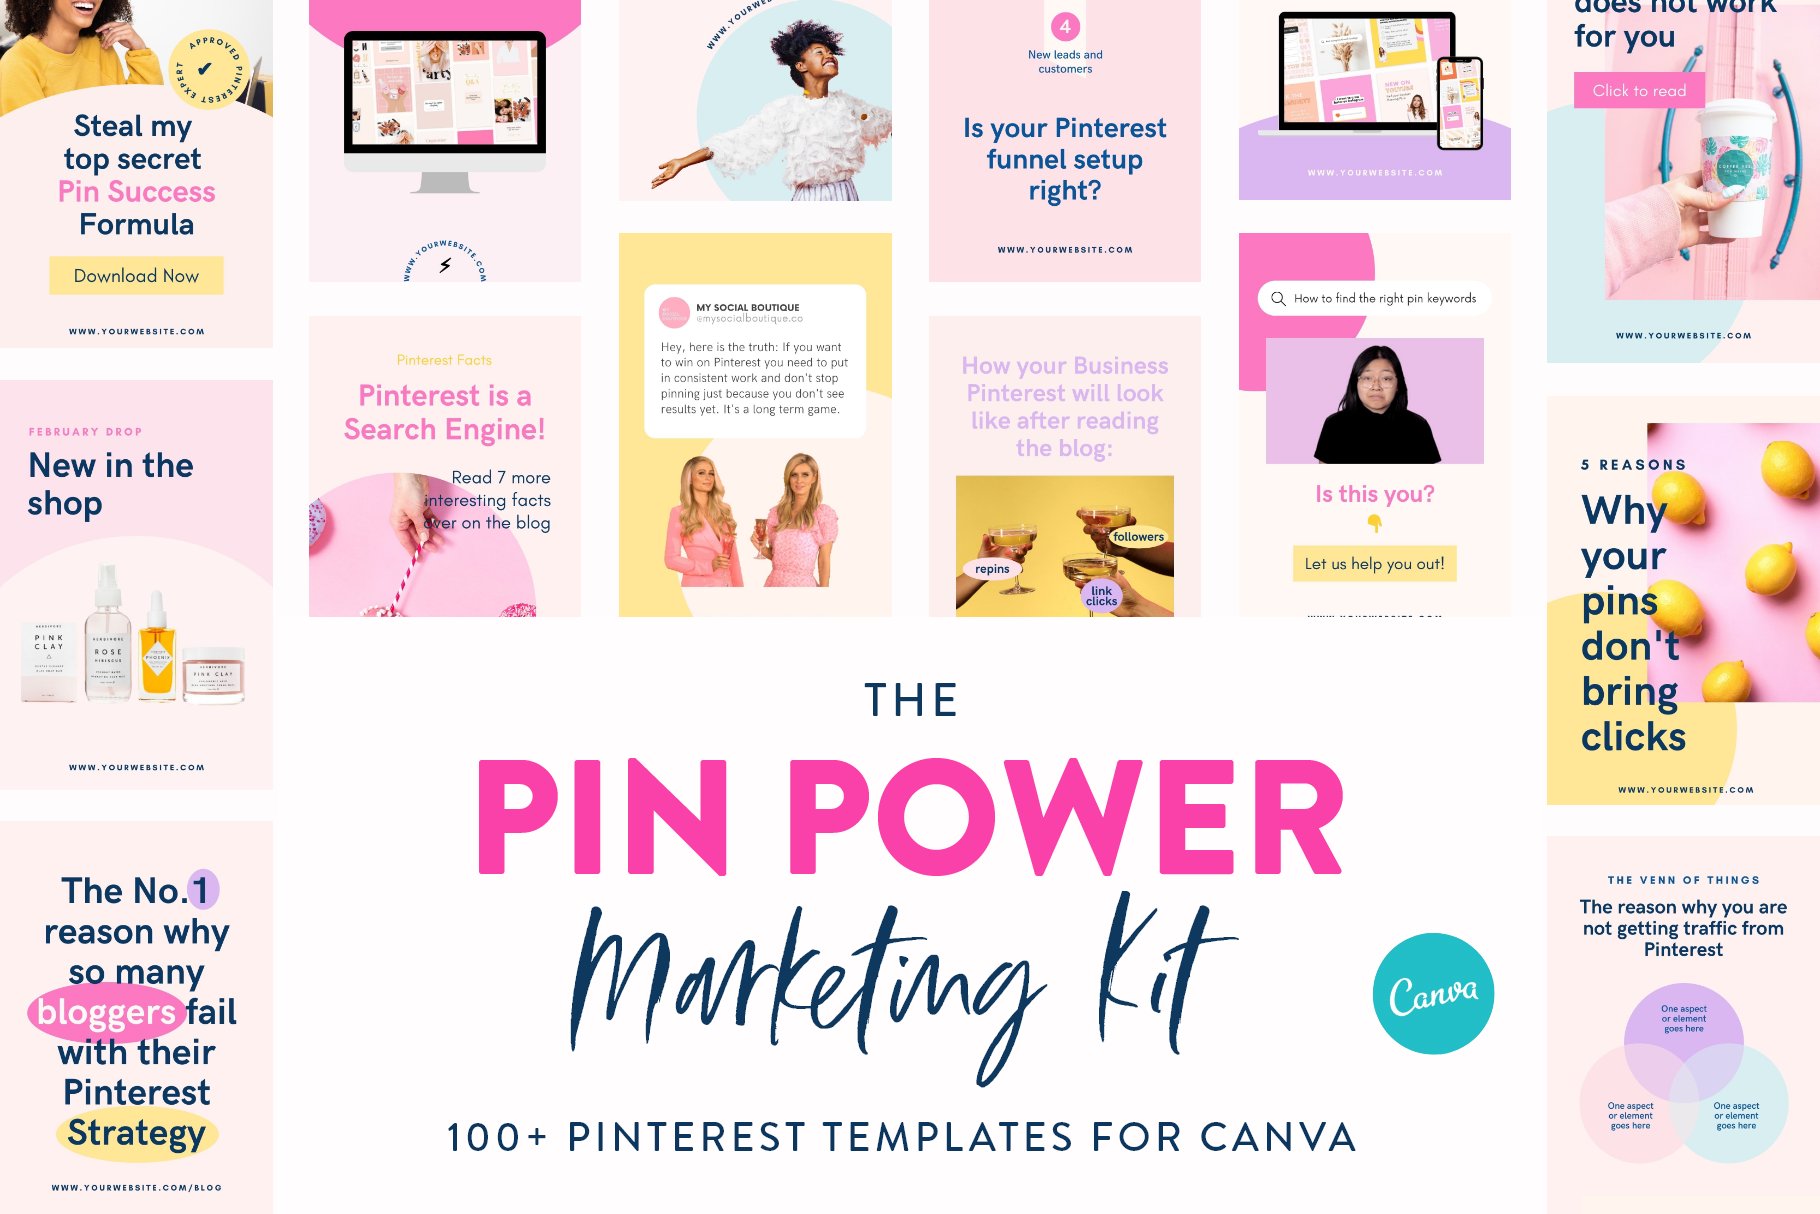 Nice Pinterest template for marketing purposes.